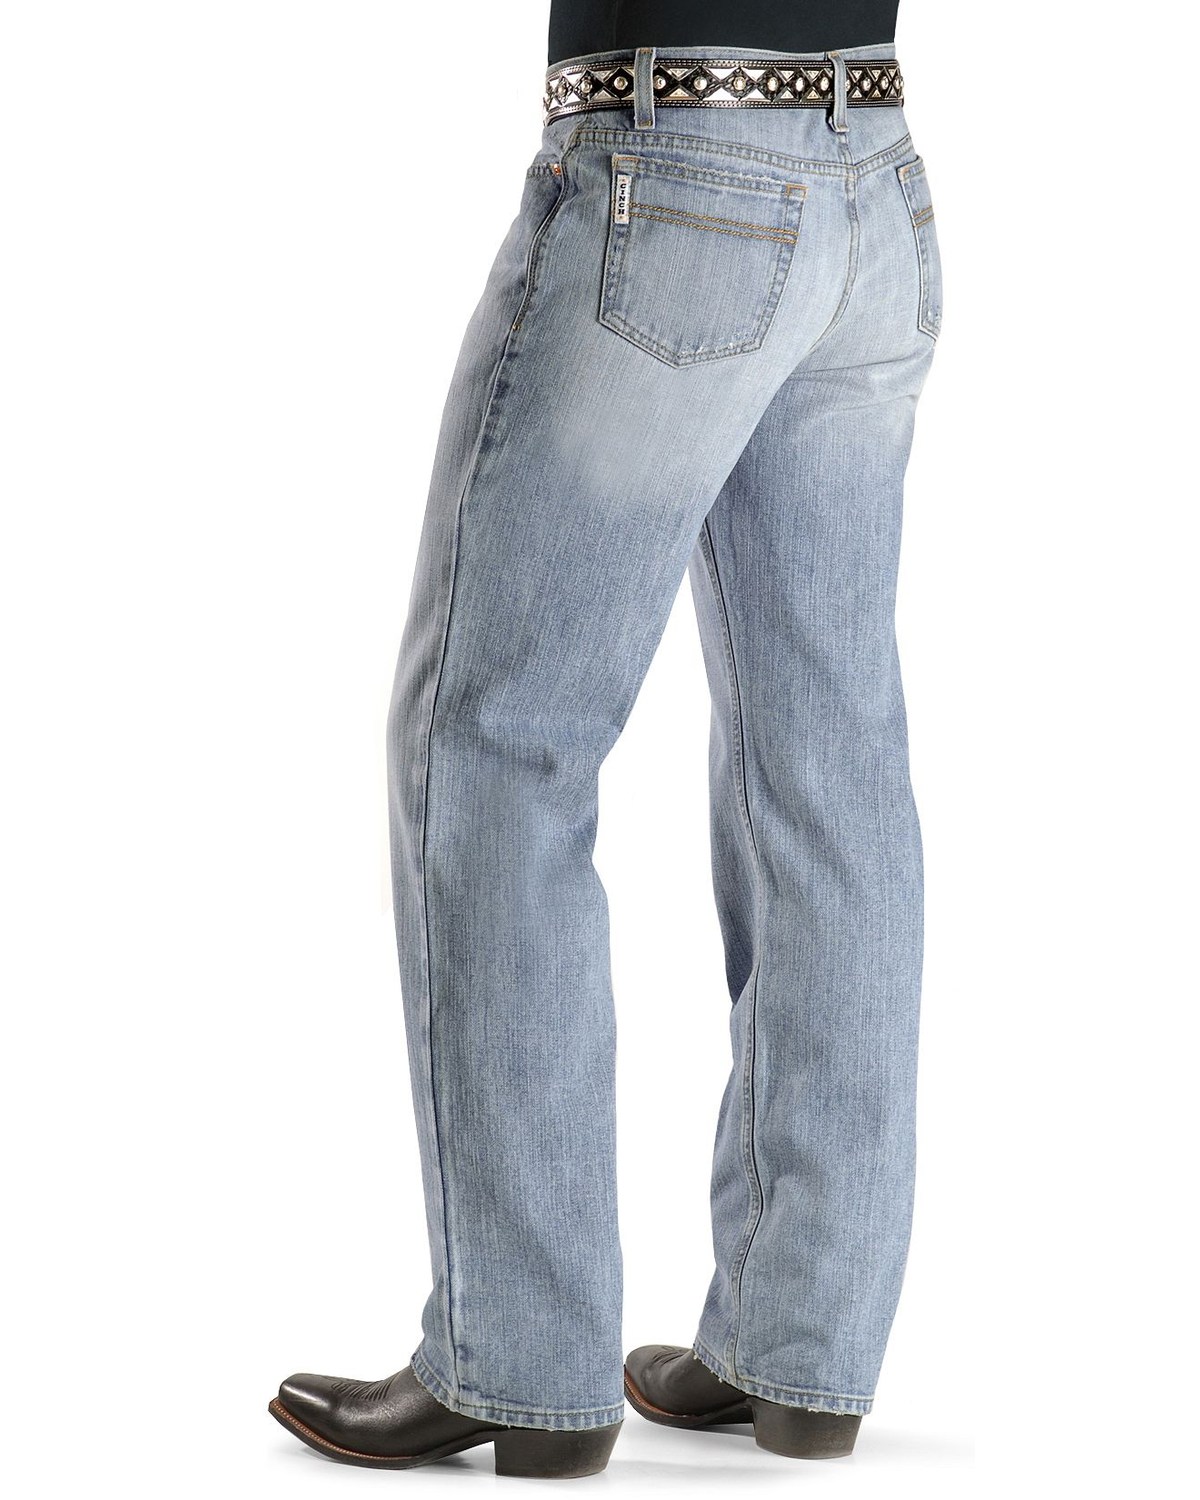 Cinch Jeans - White Label Relaxed Fit 